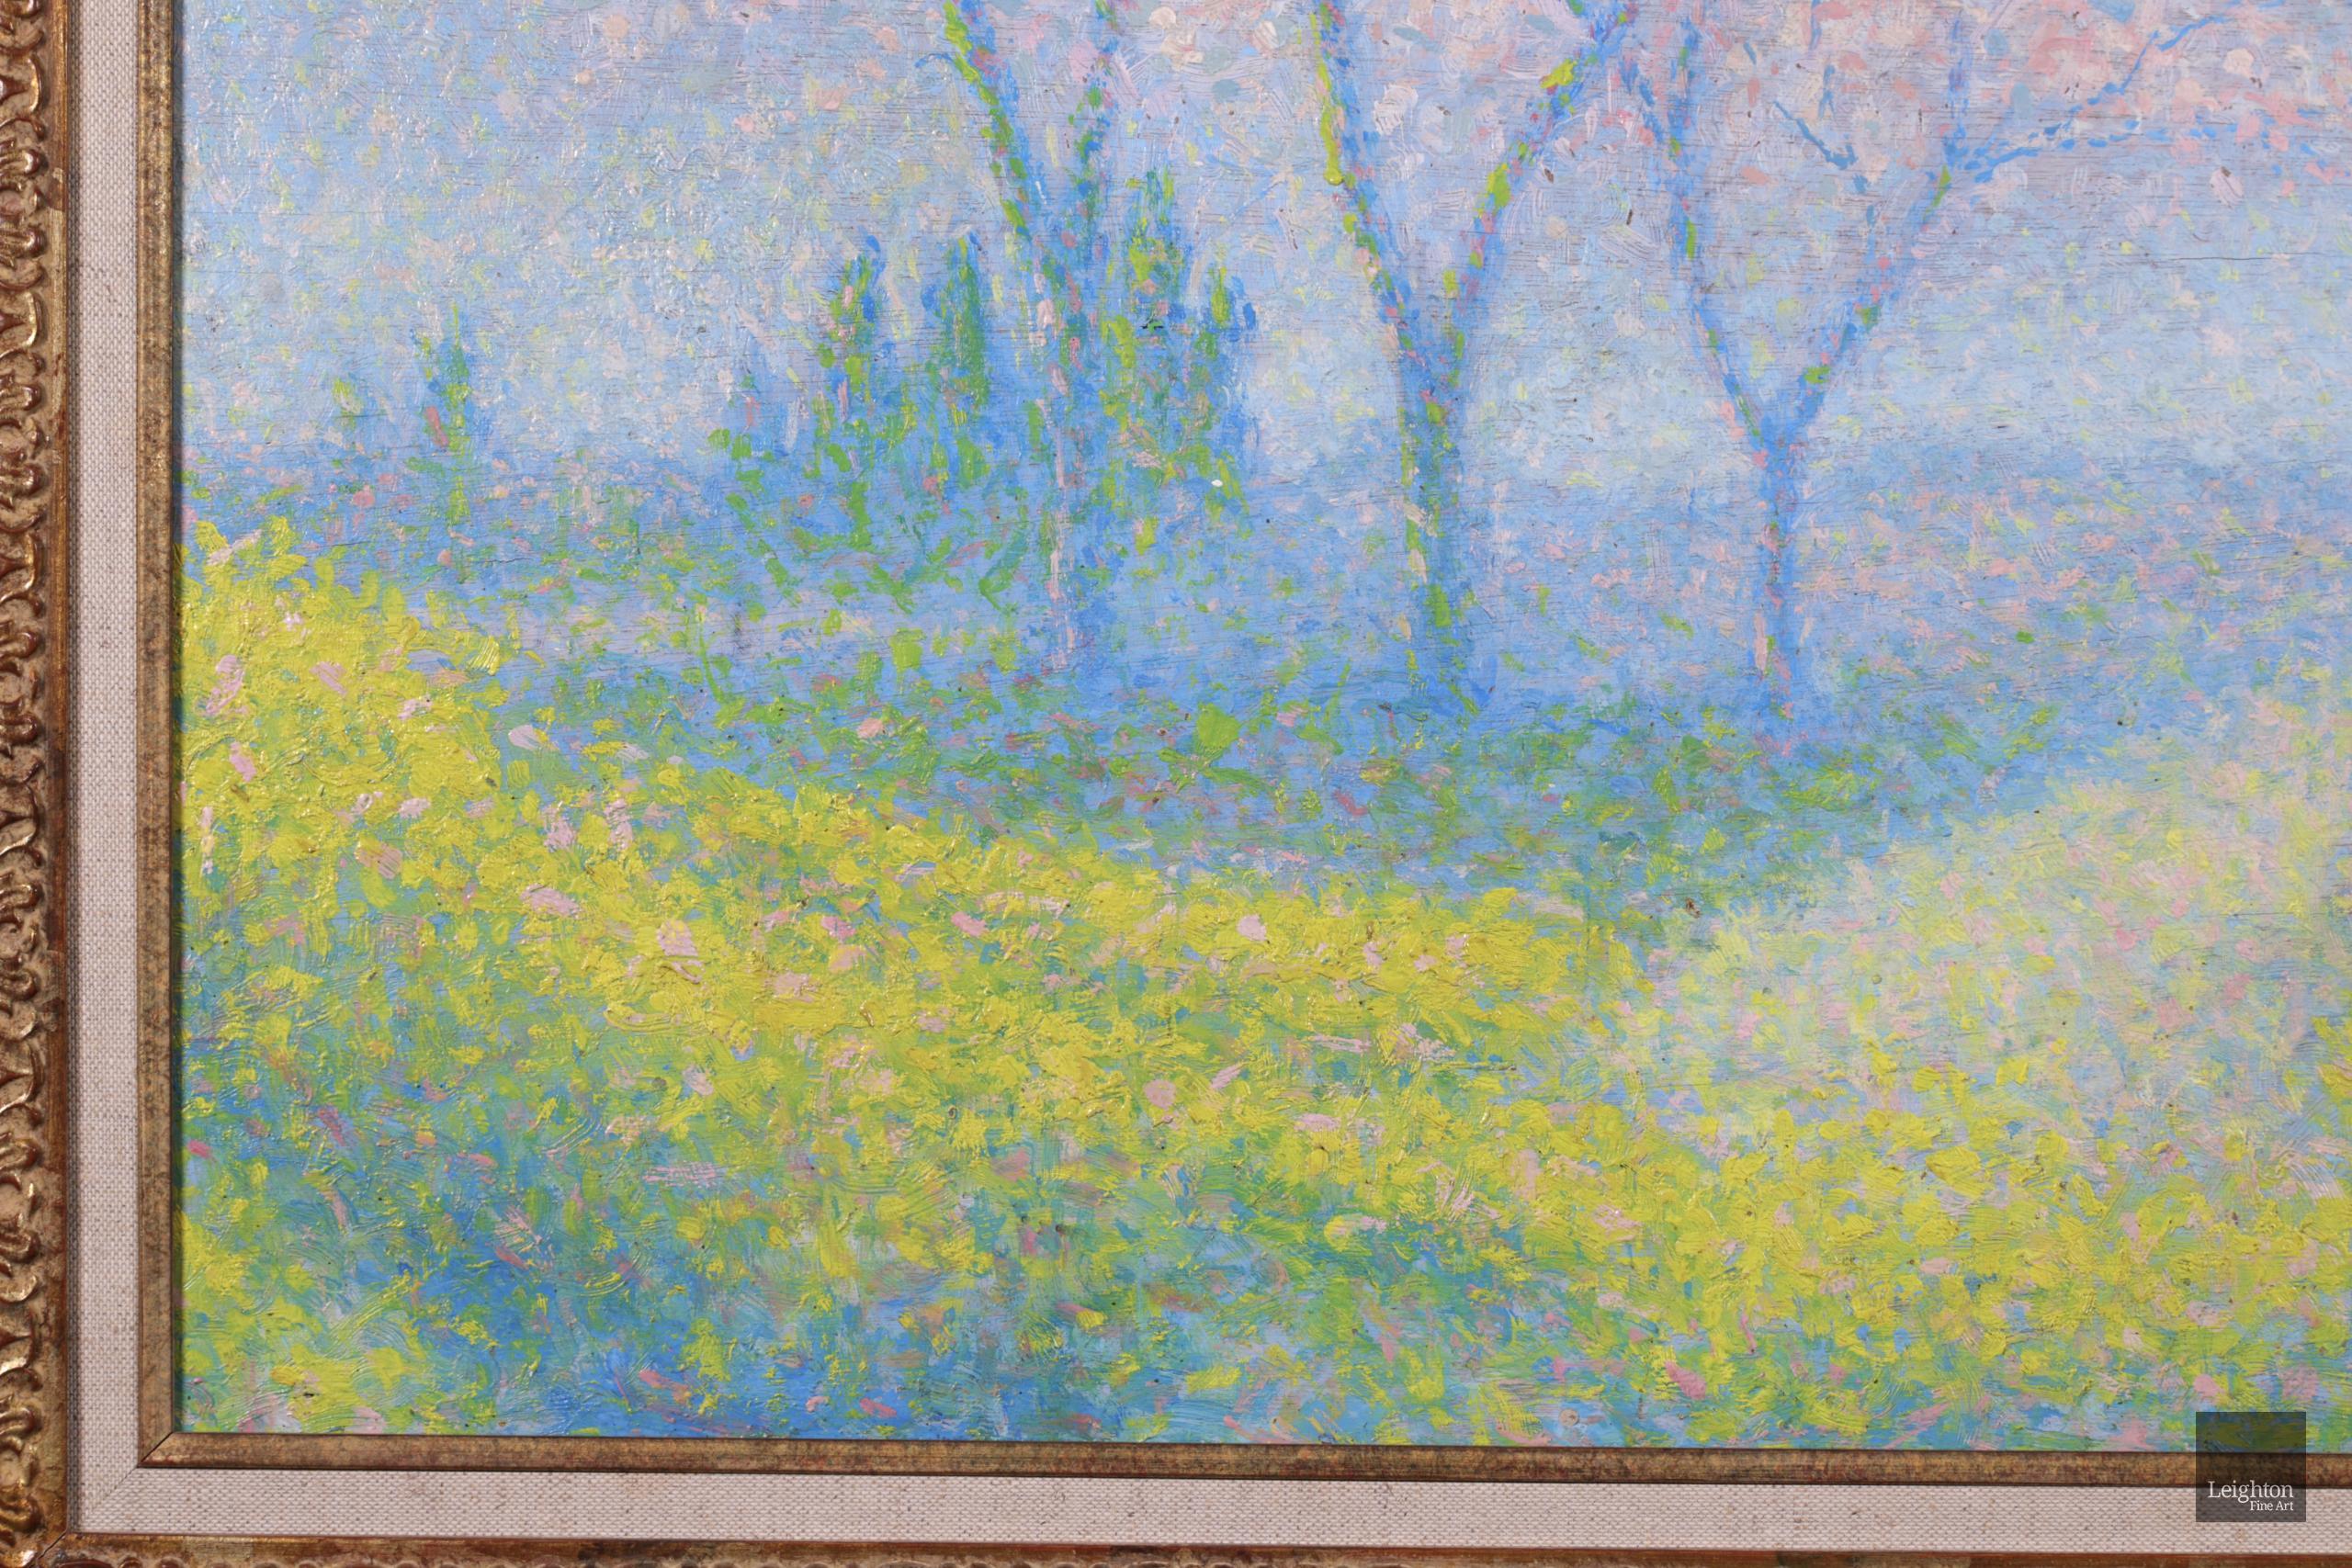 Stunning pointillist landscape oil on panel circa 1920 by French neo-impressionist painter Achille Lauge. The work depicts a spring landscape. In the centre are three tall trees covered in white and pink blossom. The trees are surrounded by fields